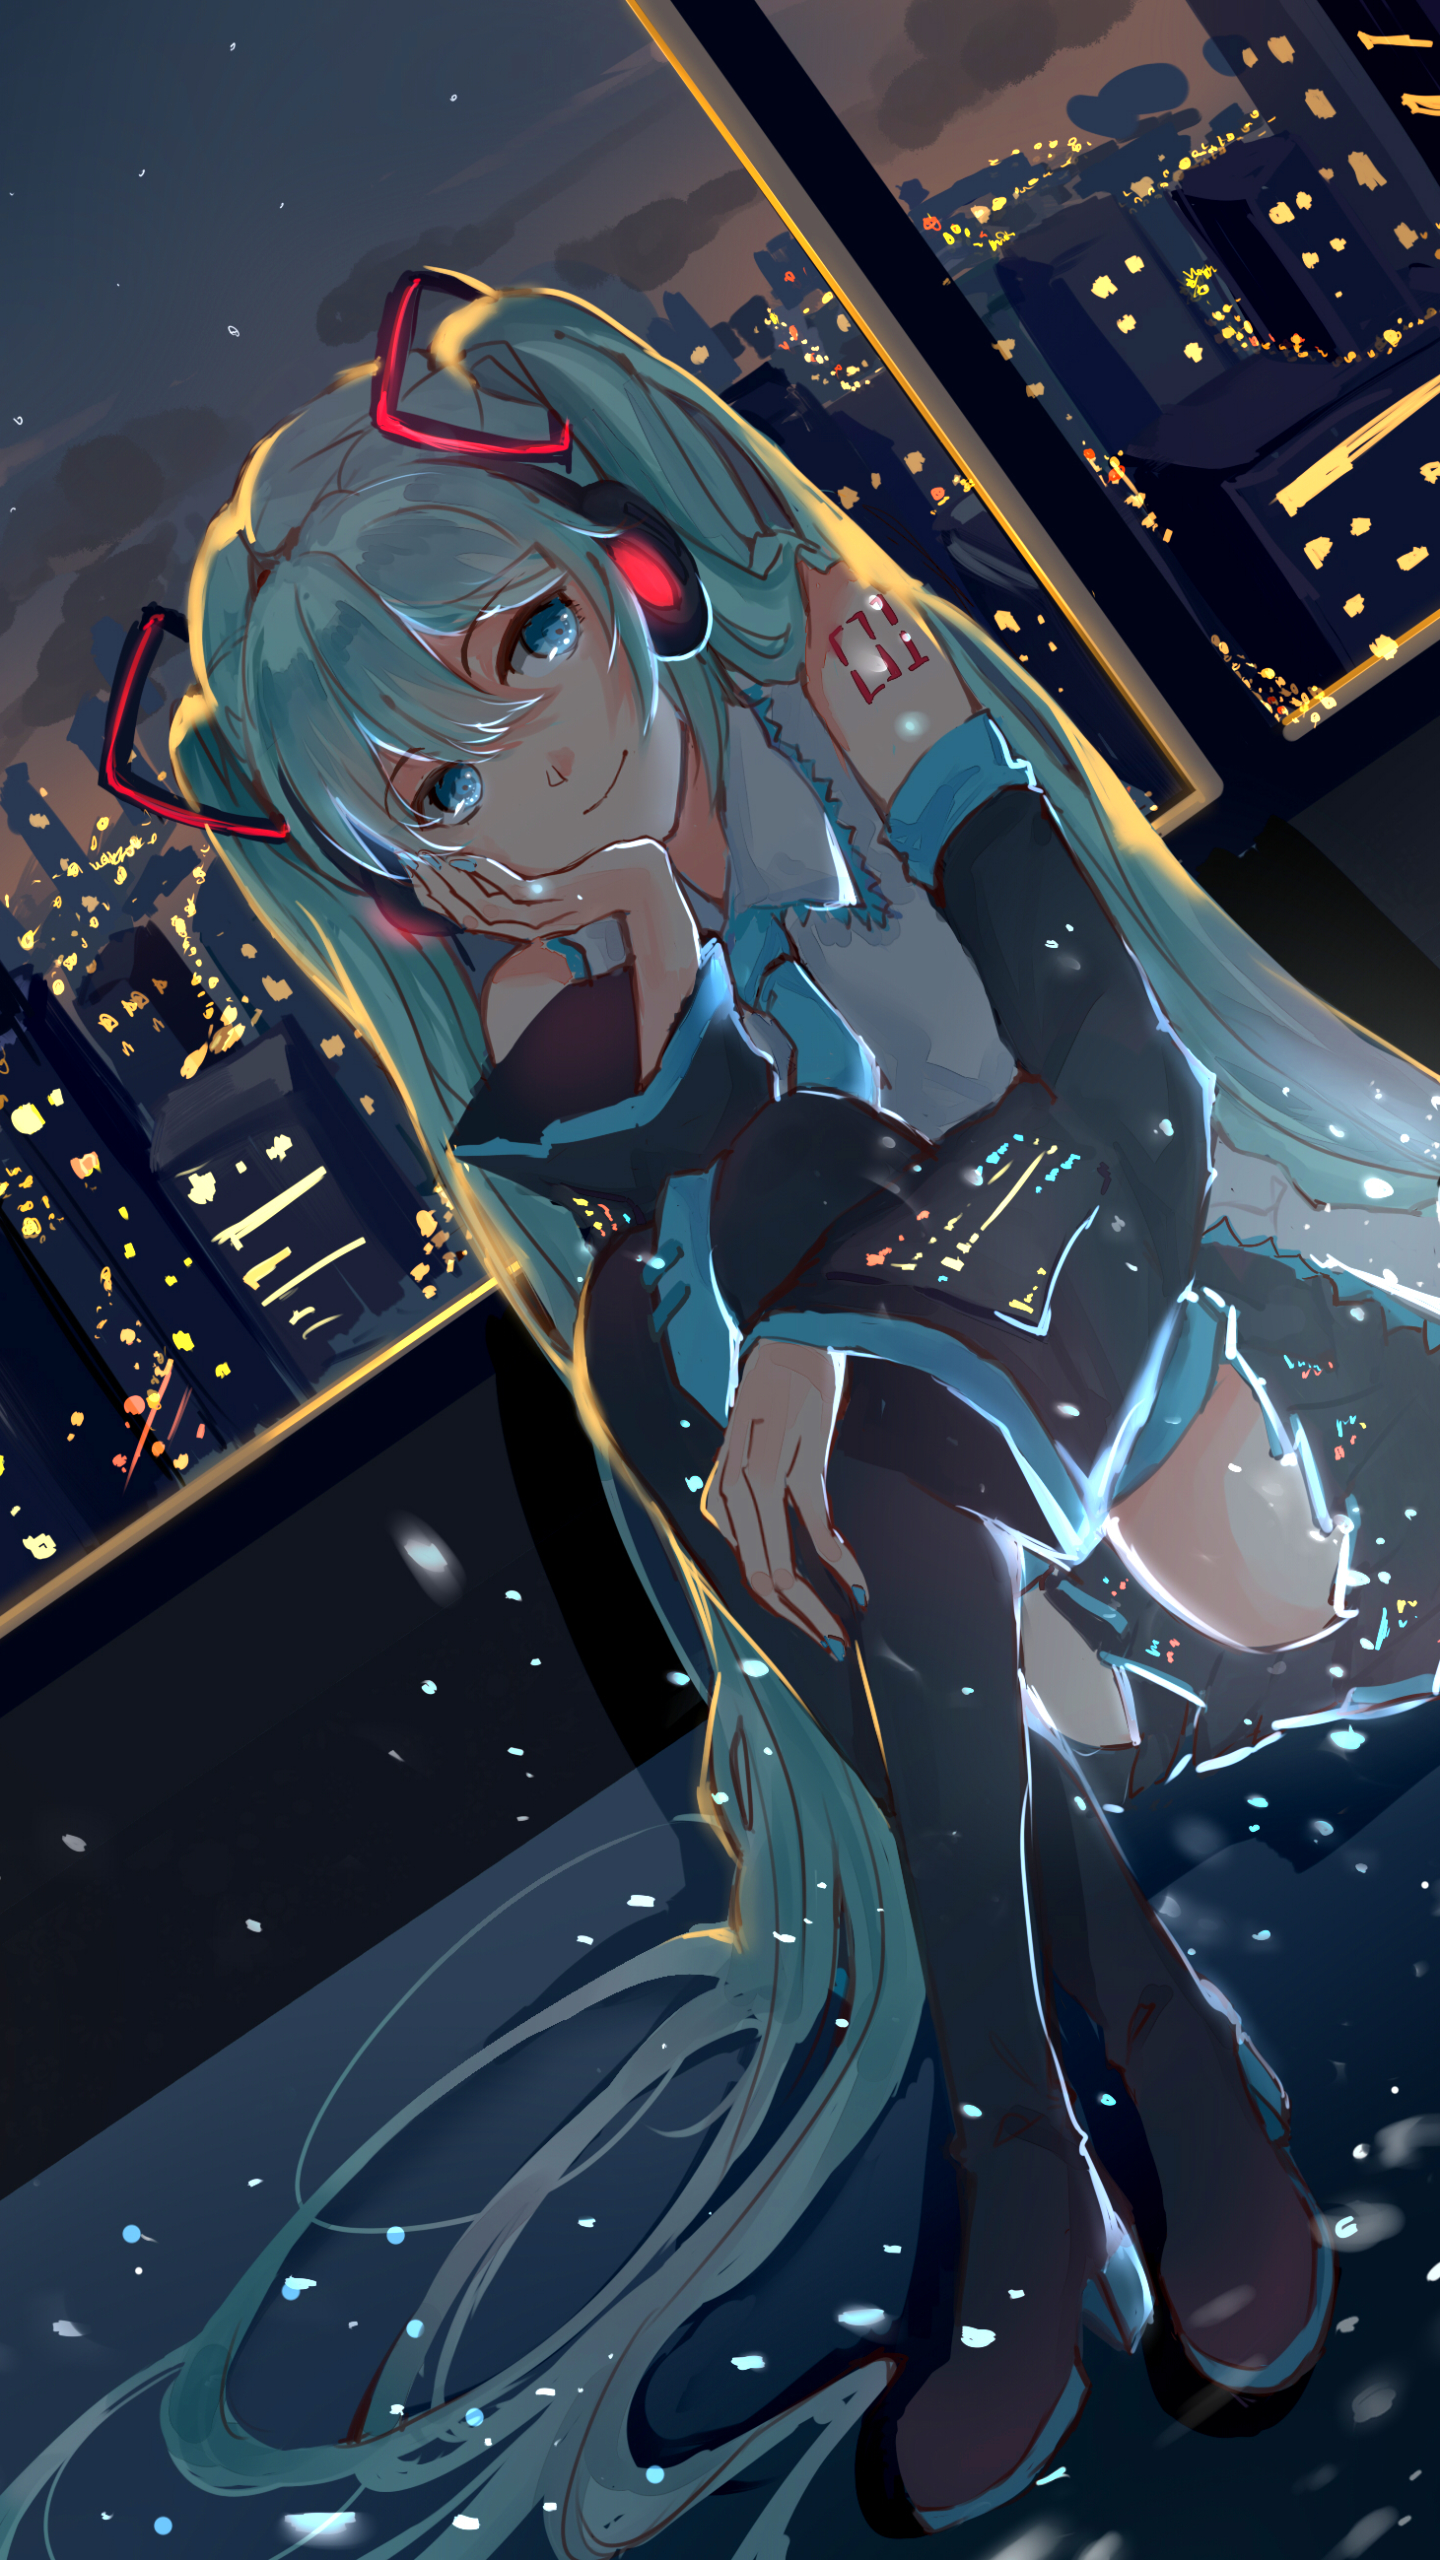 8 Hatsune Miku Apple Iphone 7 Plus 1080x19 Wallpapers Mobile Abyss